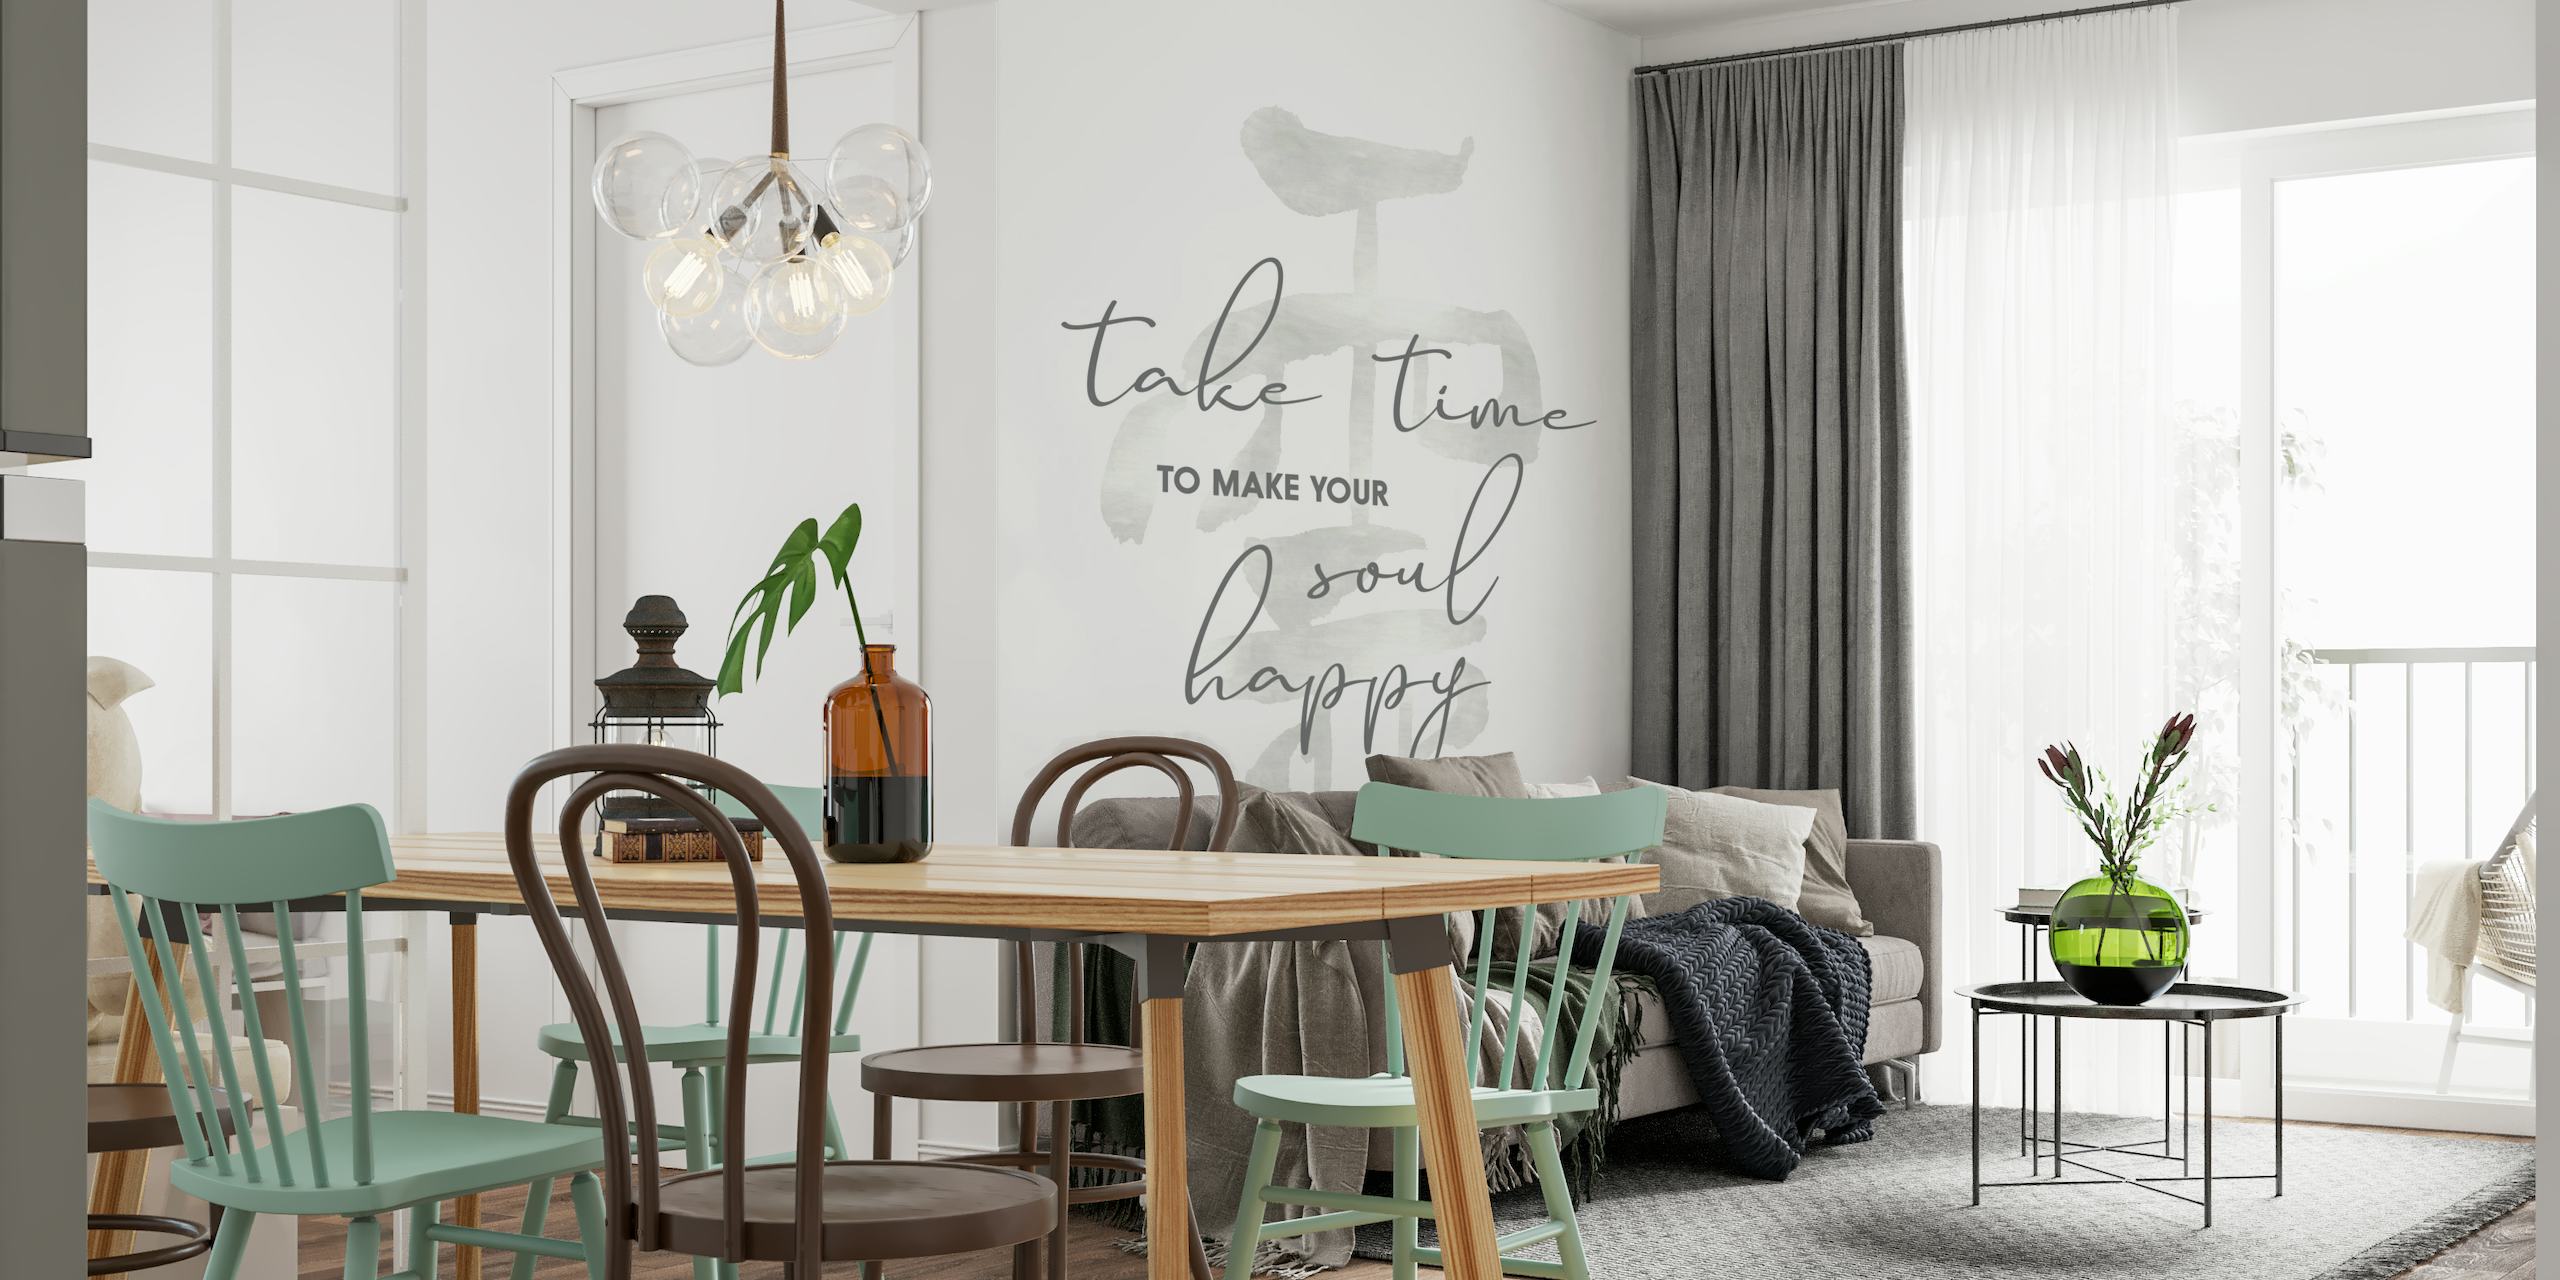 Japandi-style calligraphy wall mural with a phrase about happiness in soft gray tones